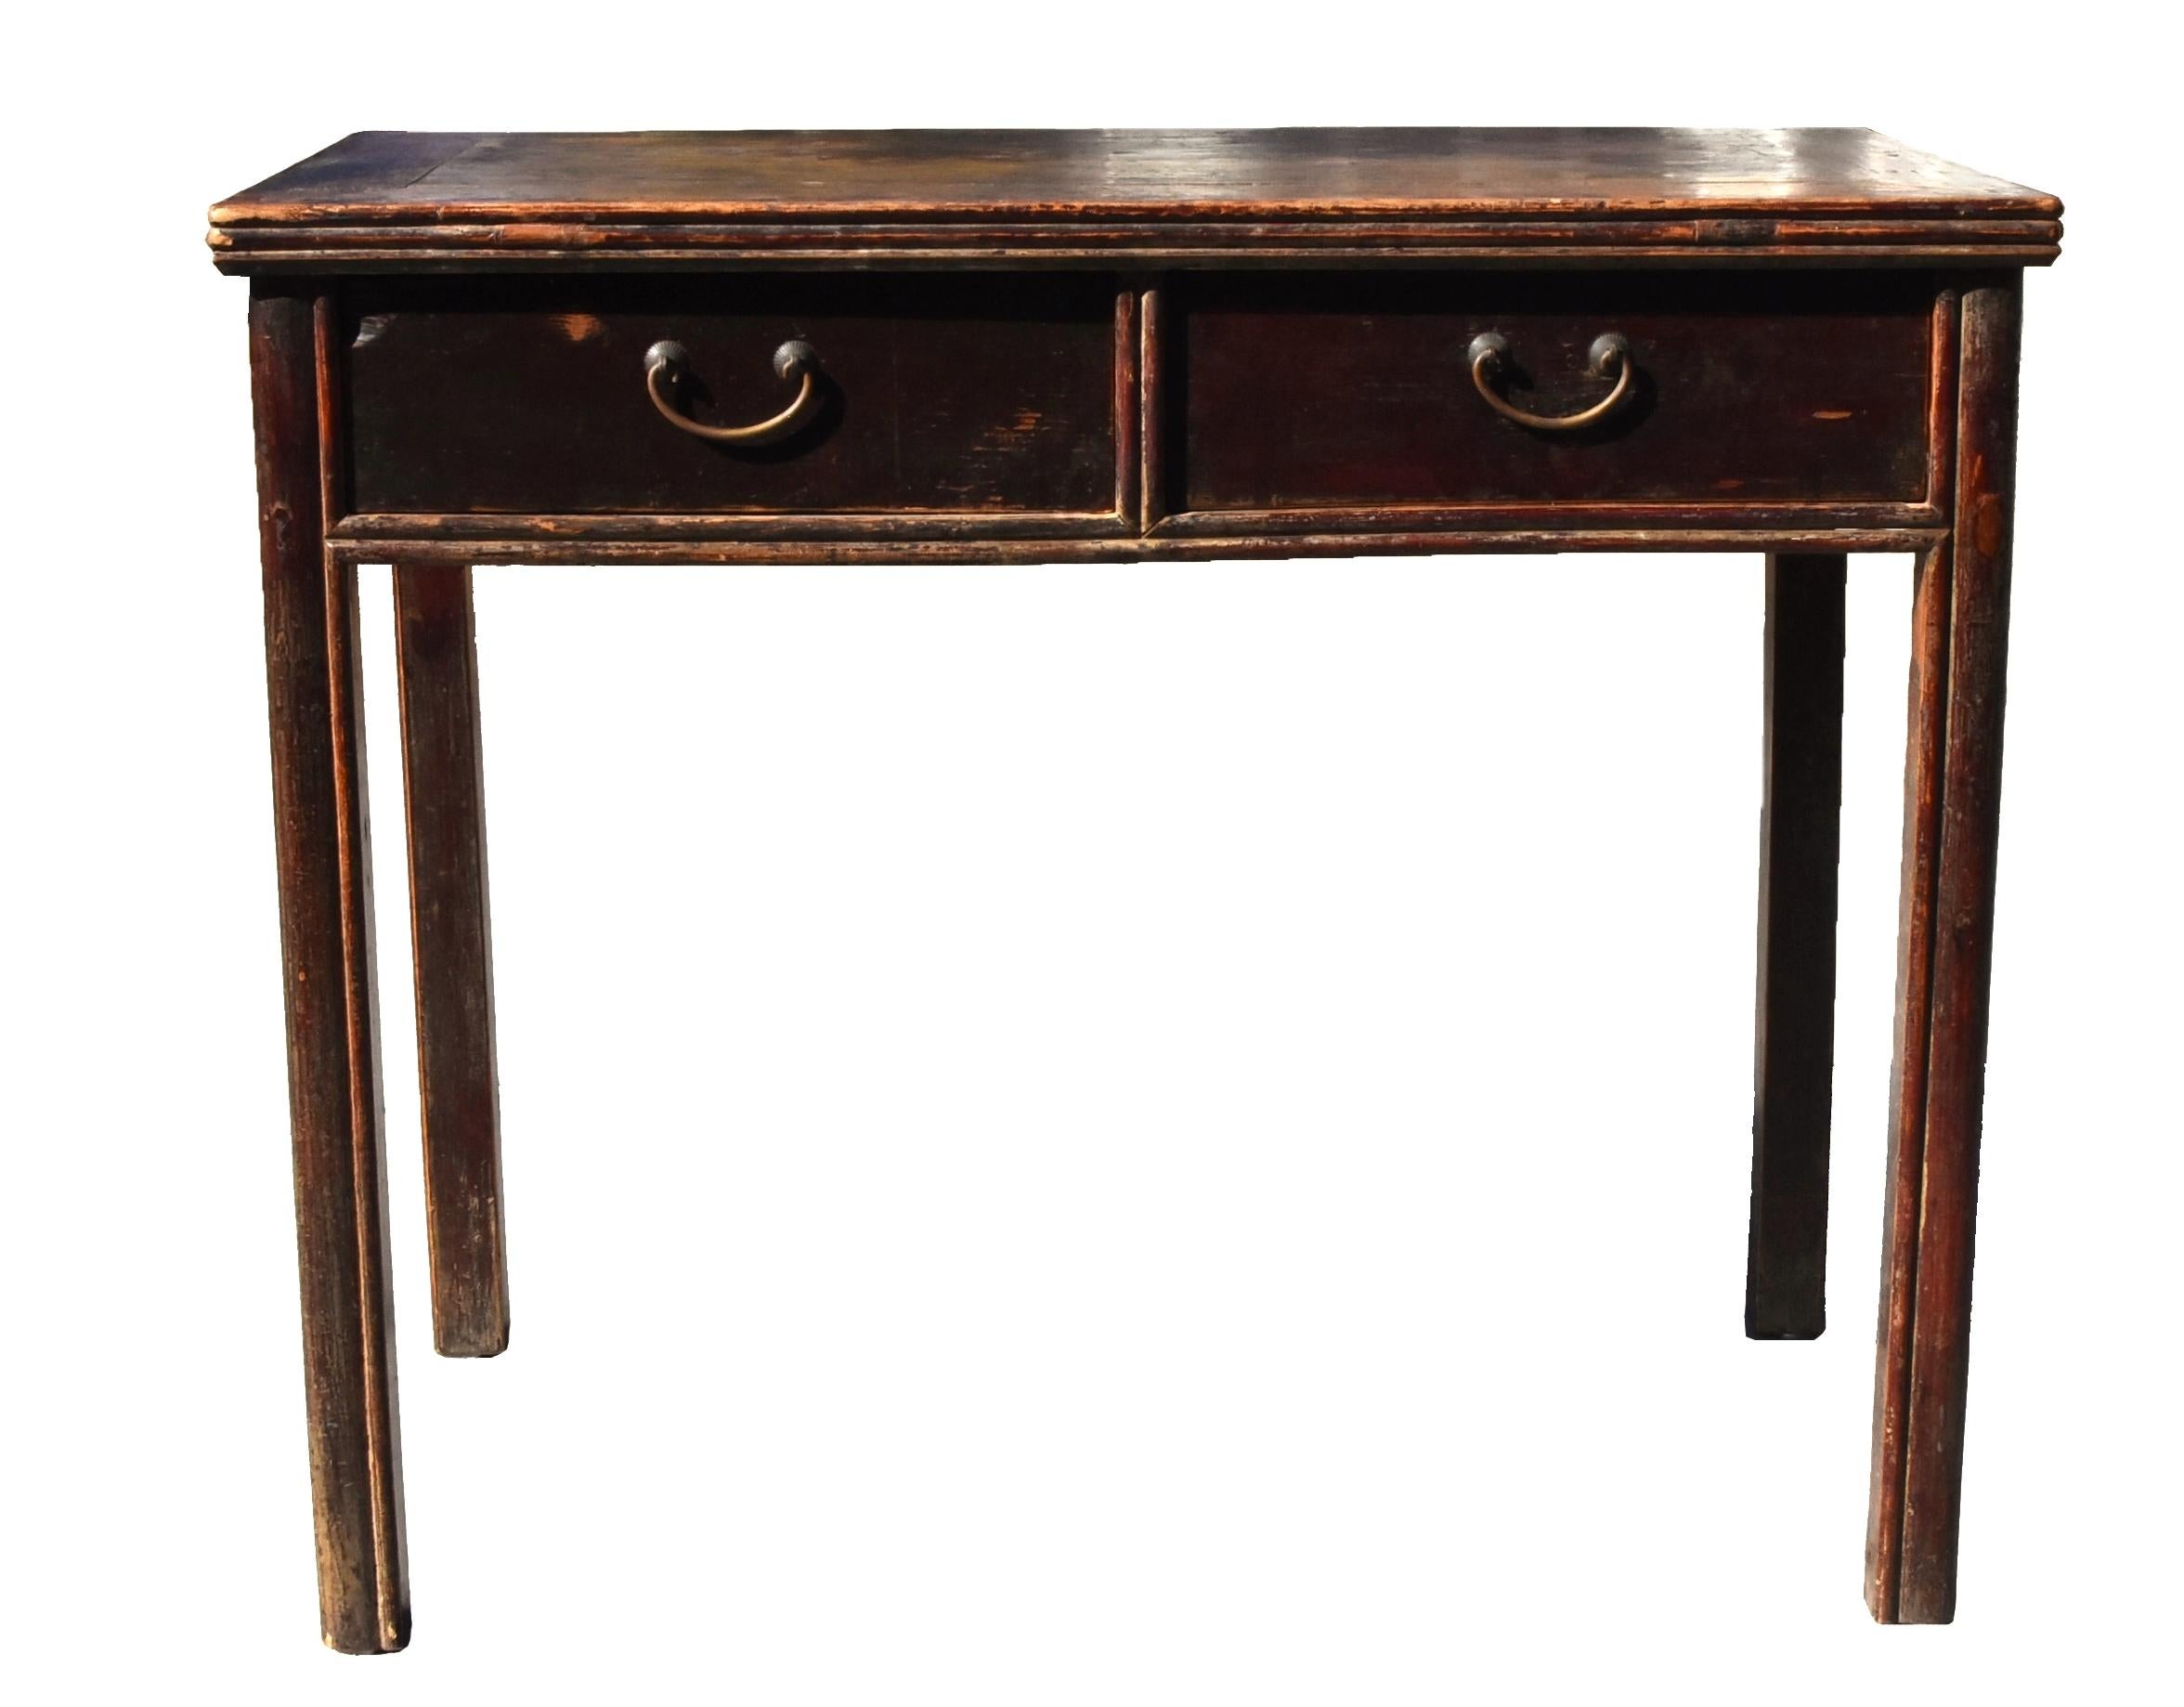 A solid wood Ming dynasty style desk with the top constructed of four members joined by mitered tenons and mortises in which a float panel is set. A pair of full size drawers anchor the desk beneath carved waist resembling bamboos. The same pattern